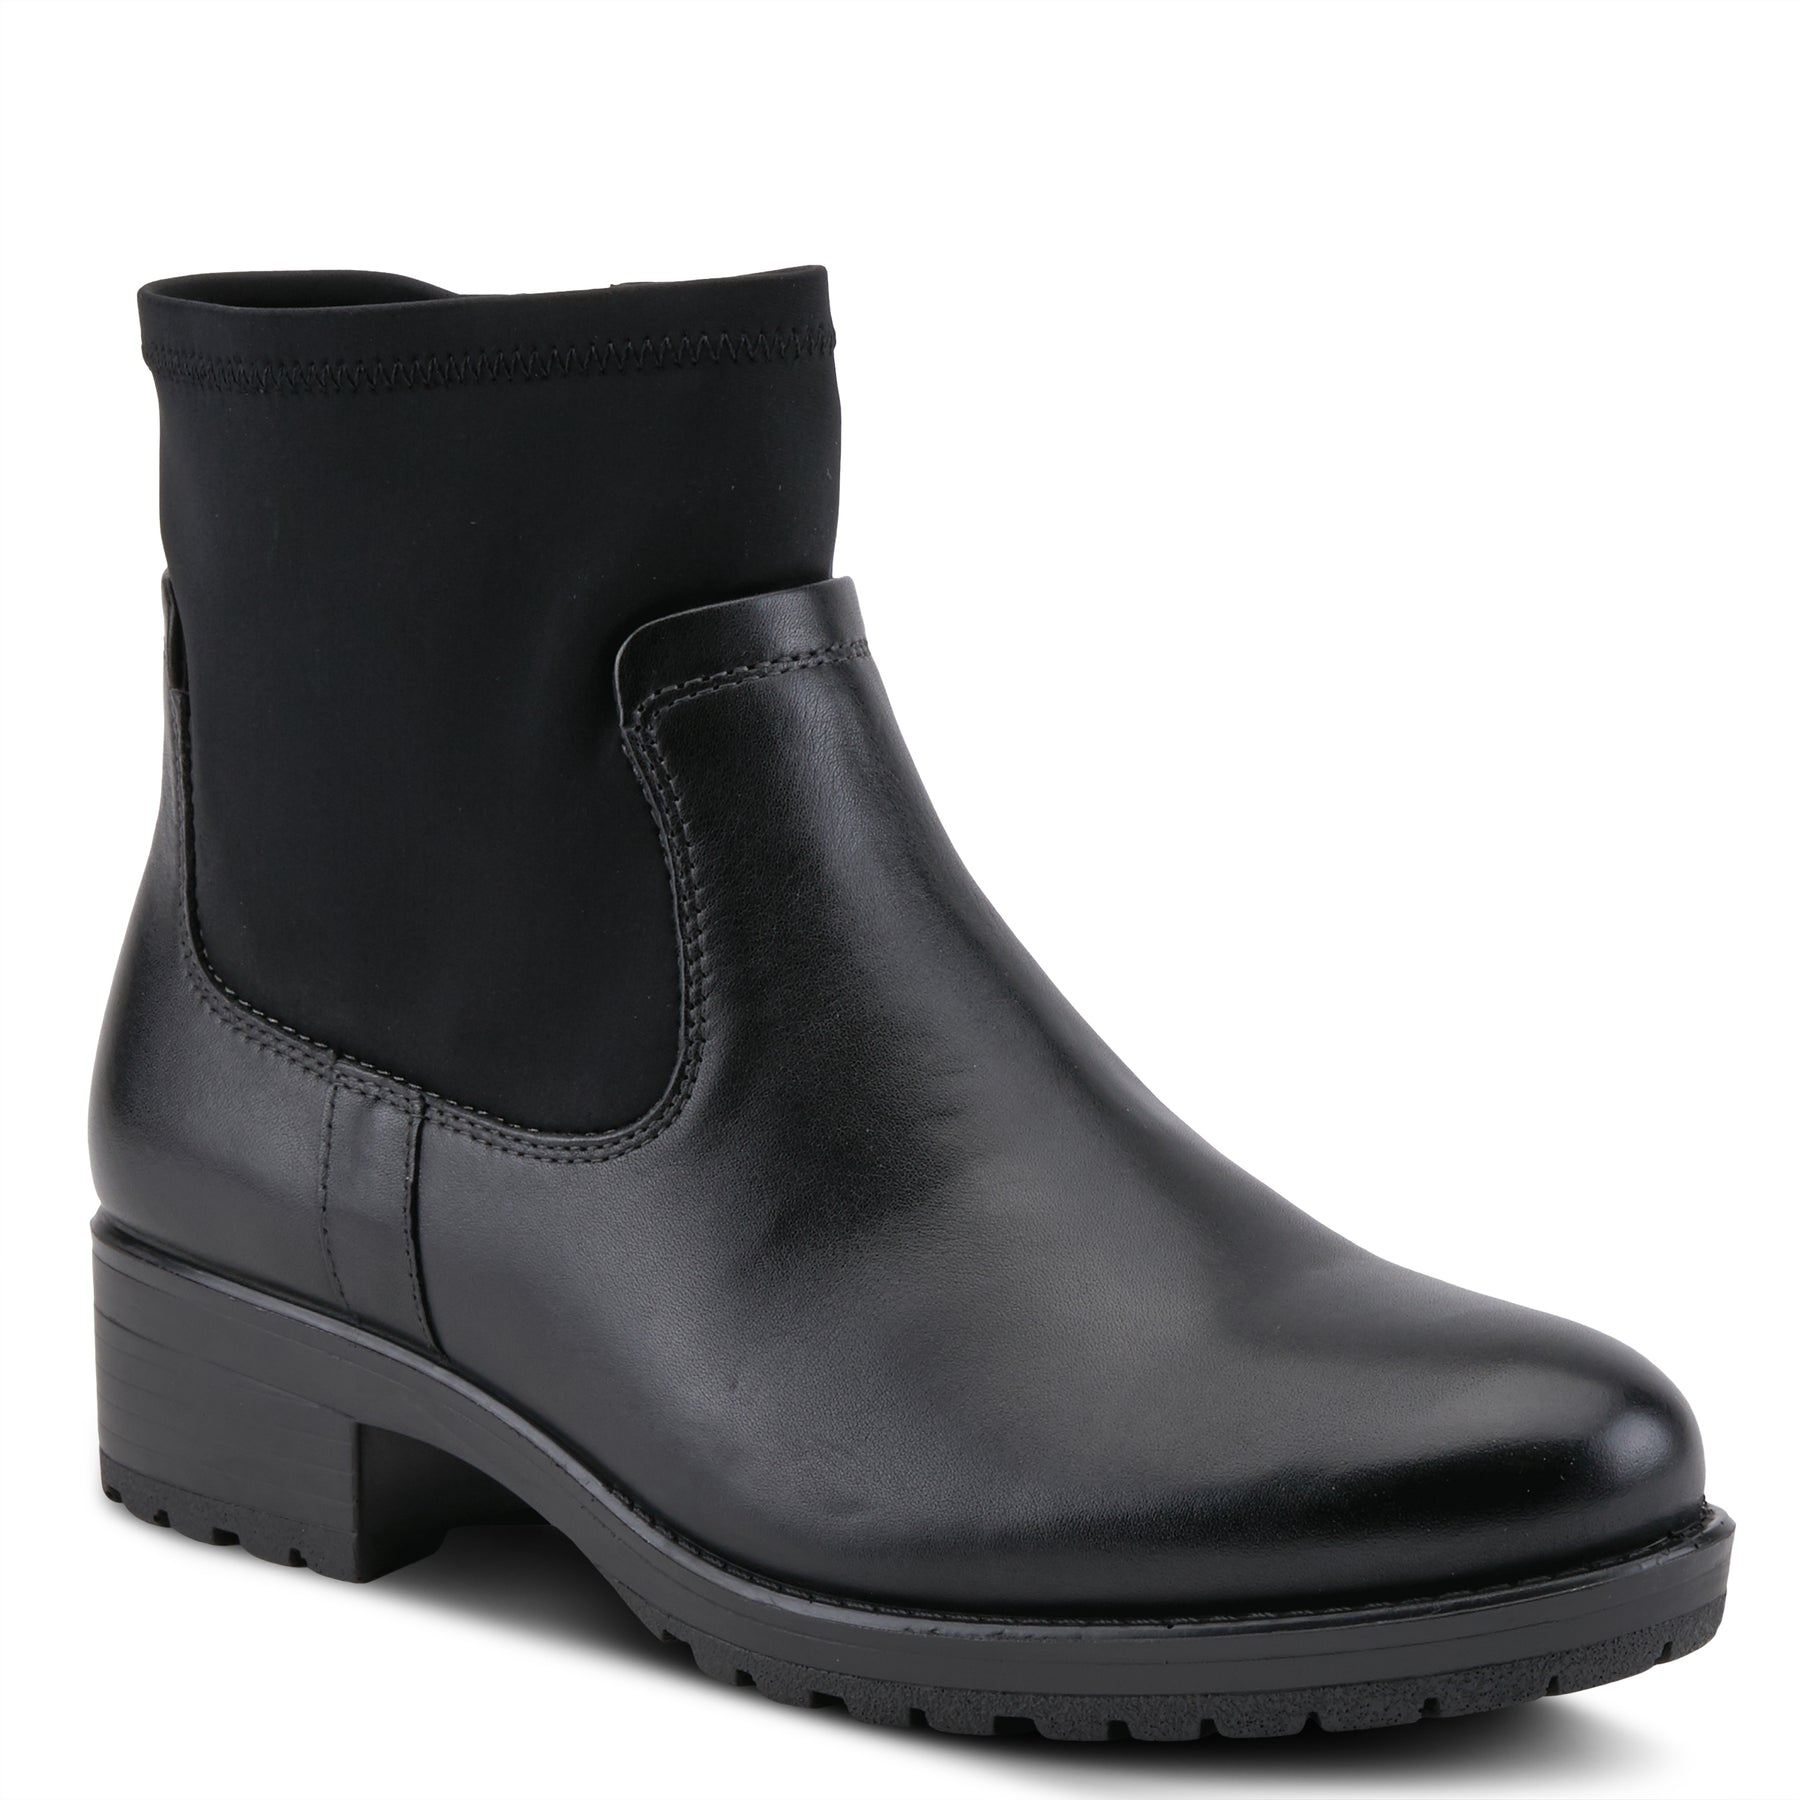 BLACK ALBHE BOOT by FLEXUS – Spring Step Shoes